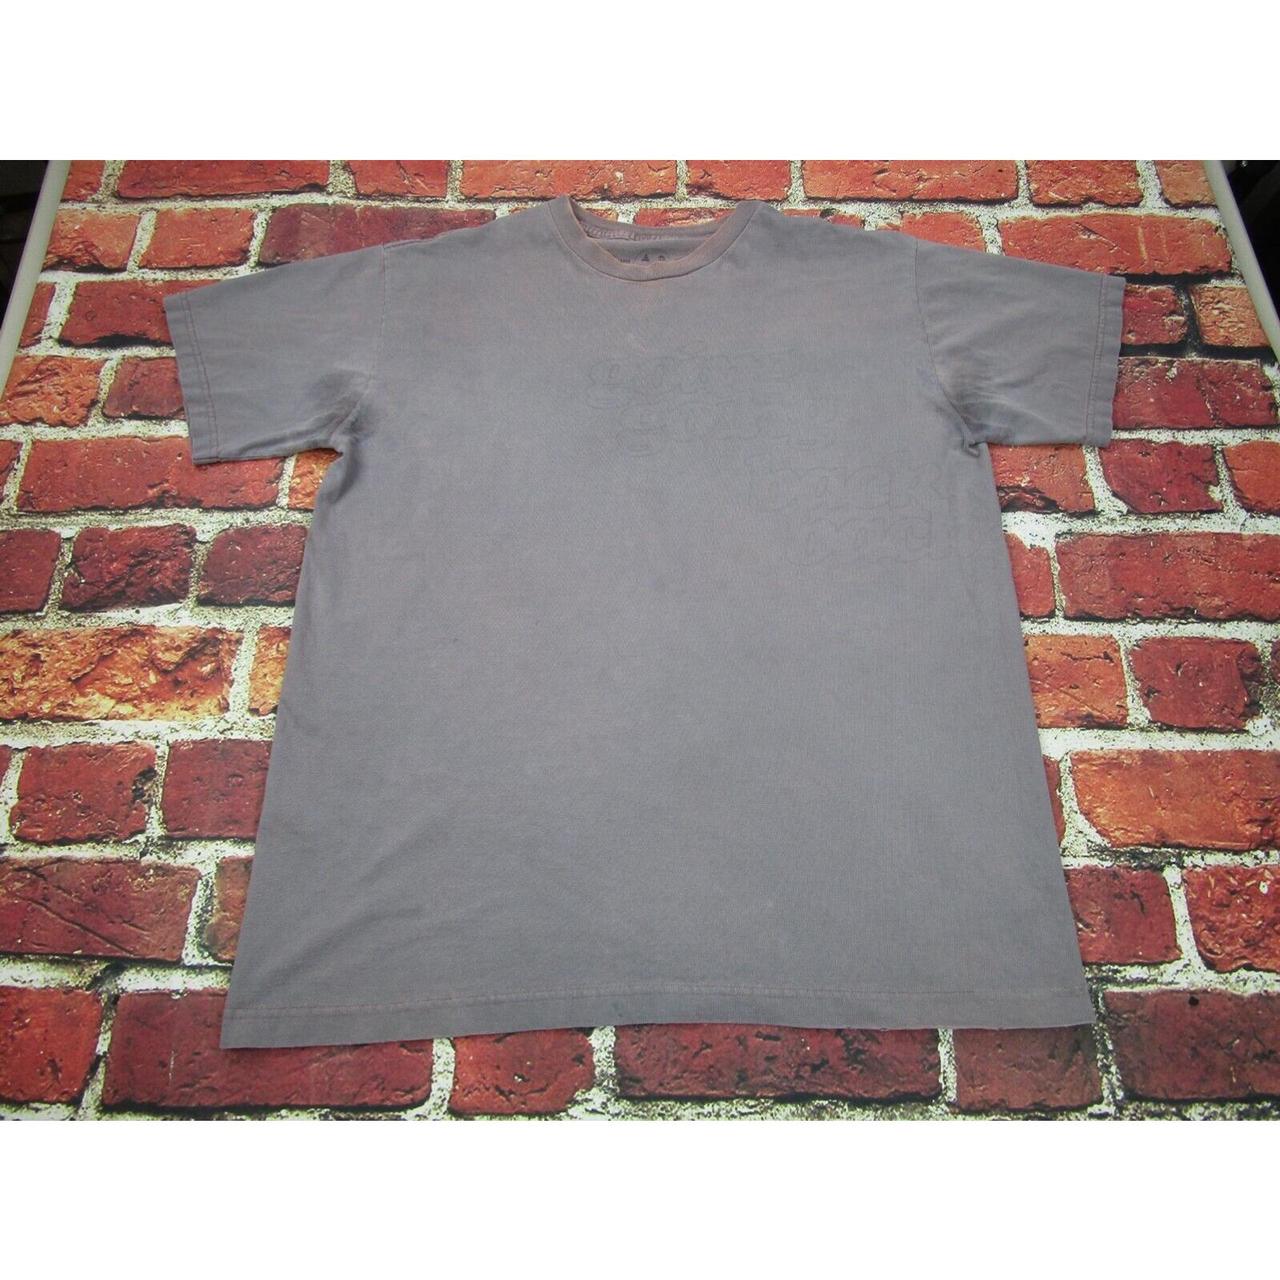 Product Image 1 - * Faded and distressed Wash
